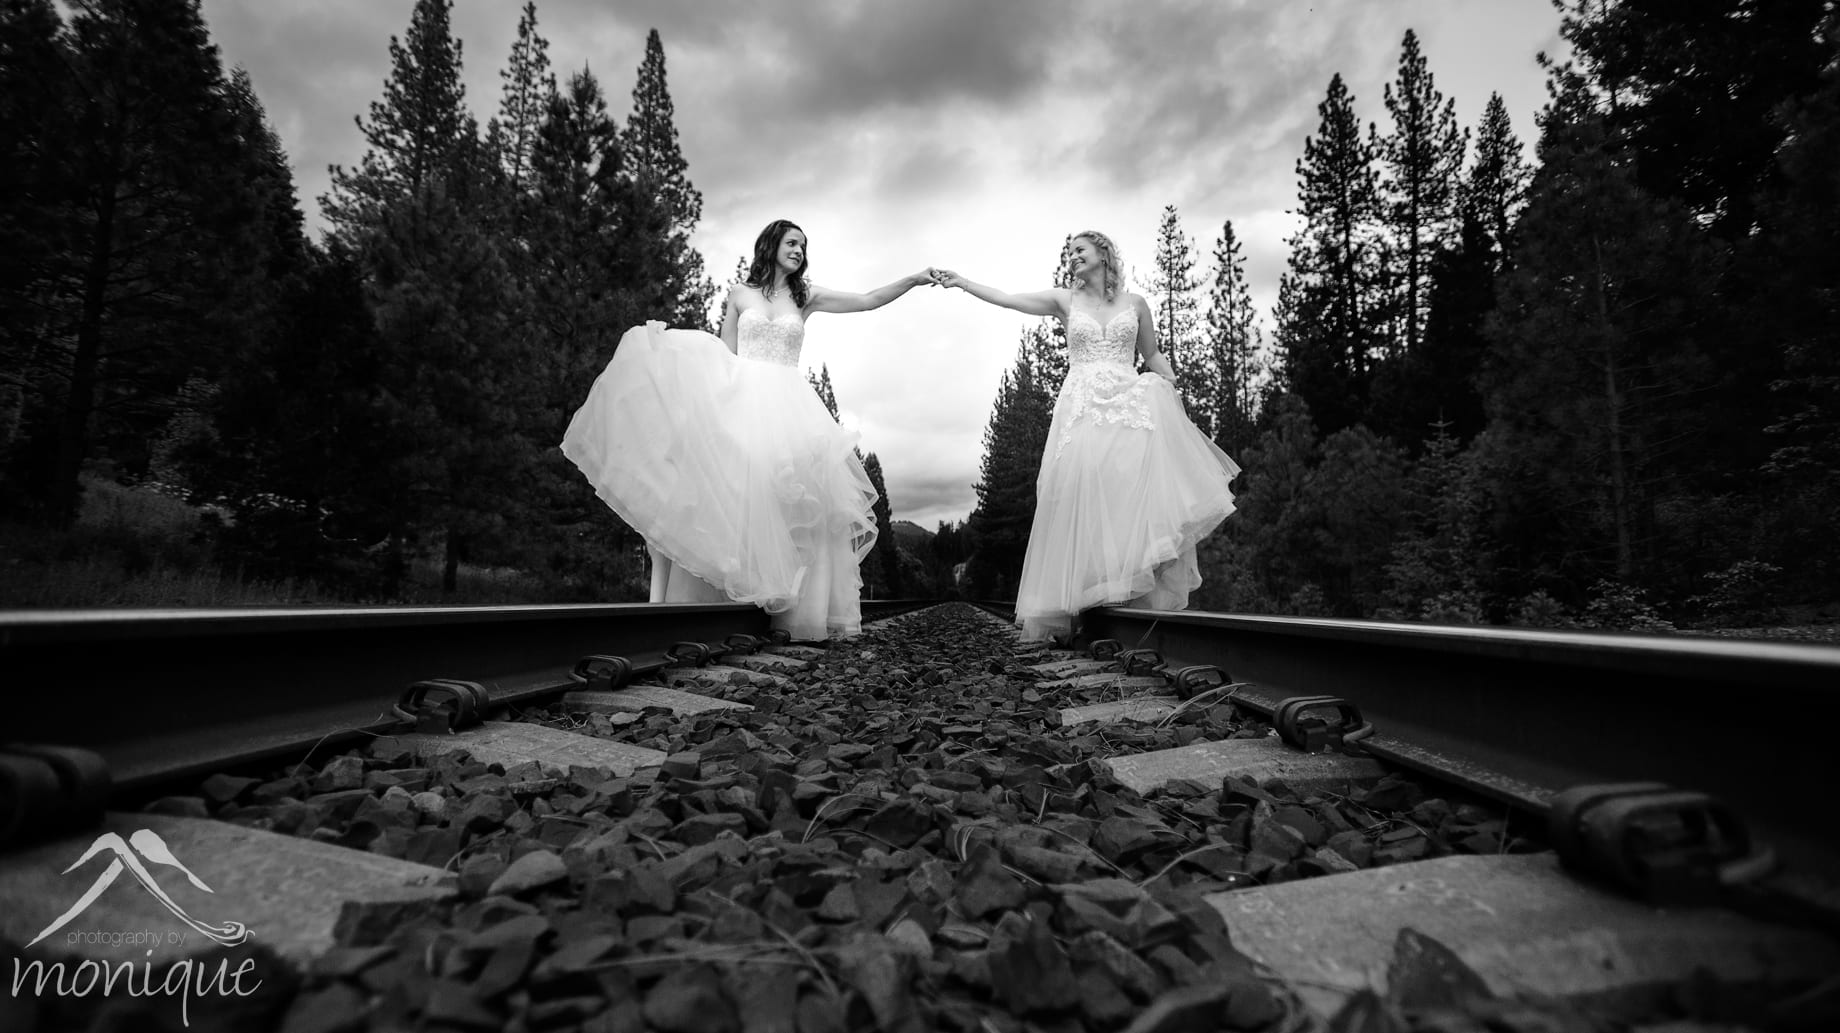 Twenty Mile House wedding photography, same sex weddings, two brides at the reception by Photography by Monique